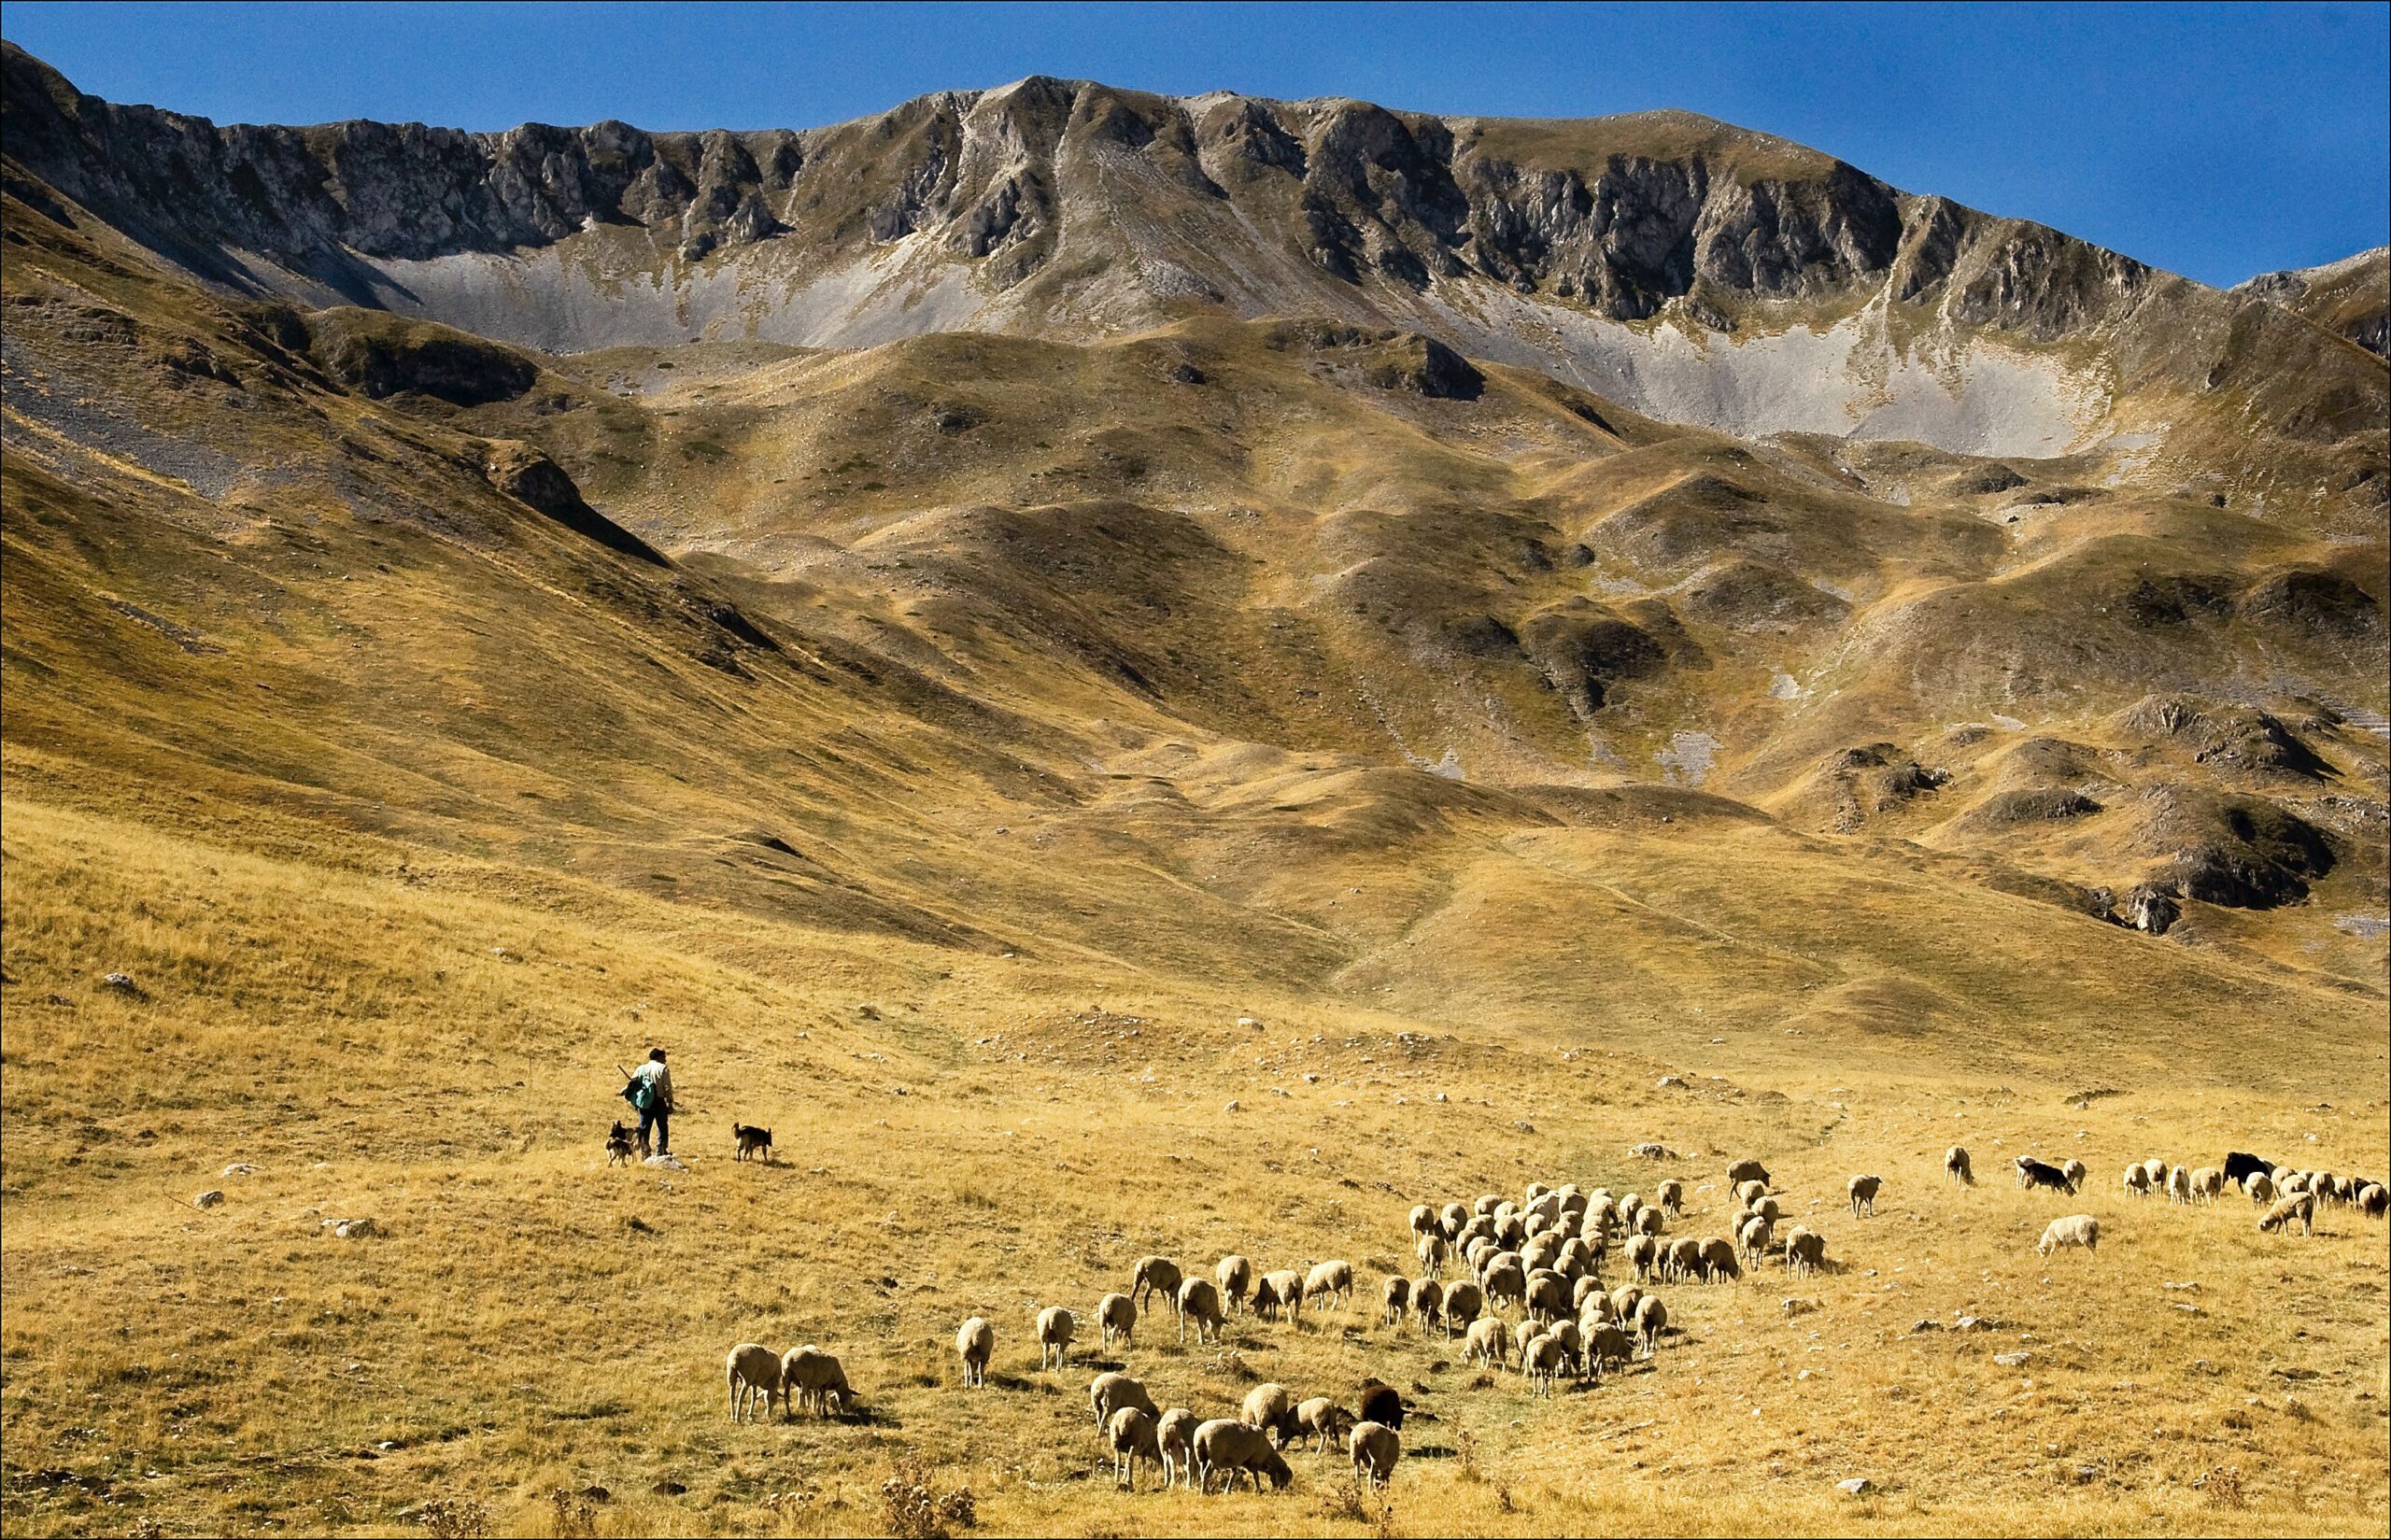 Abruzzo is a well conserved countryside region of Italy that has flourishing lands. 
pictured: A steep mountain and valley with a group of sheep and their Shepard watching over them